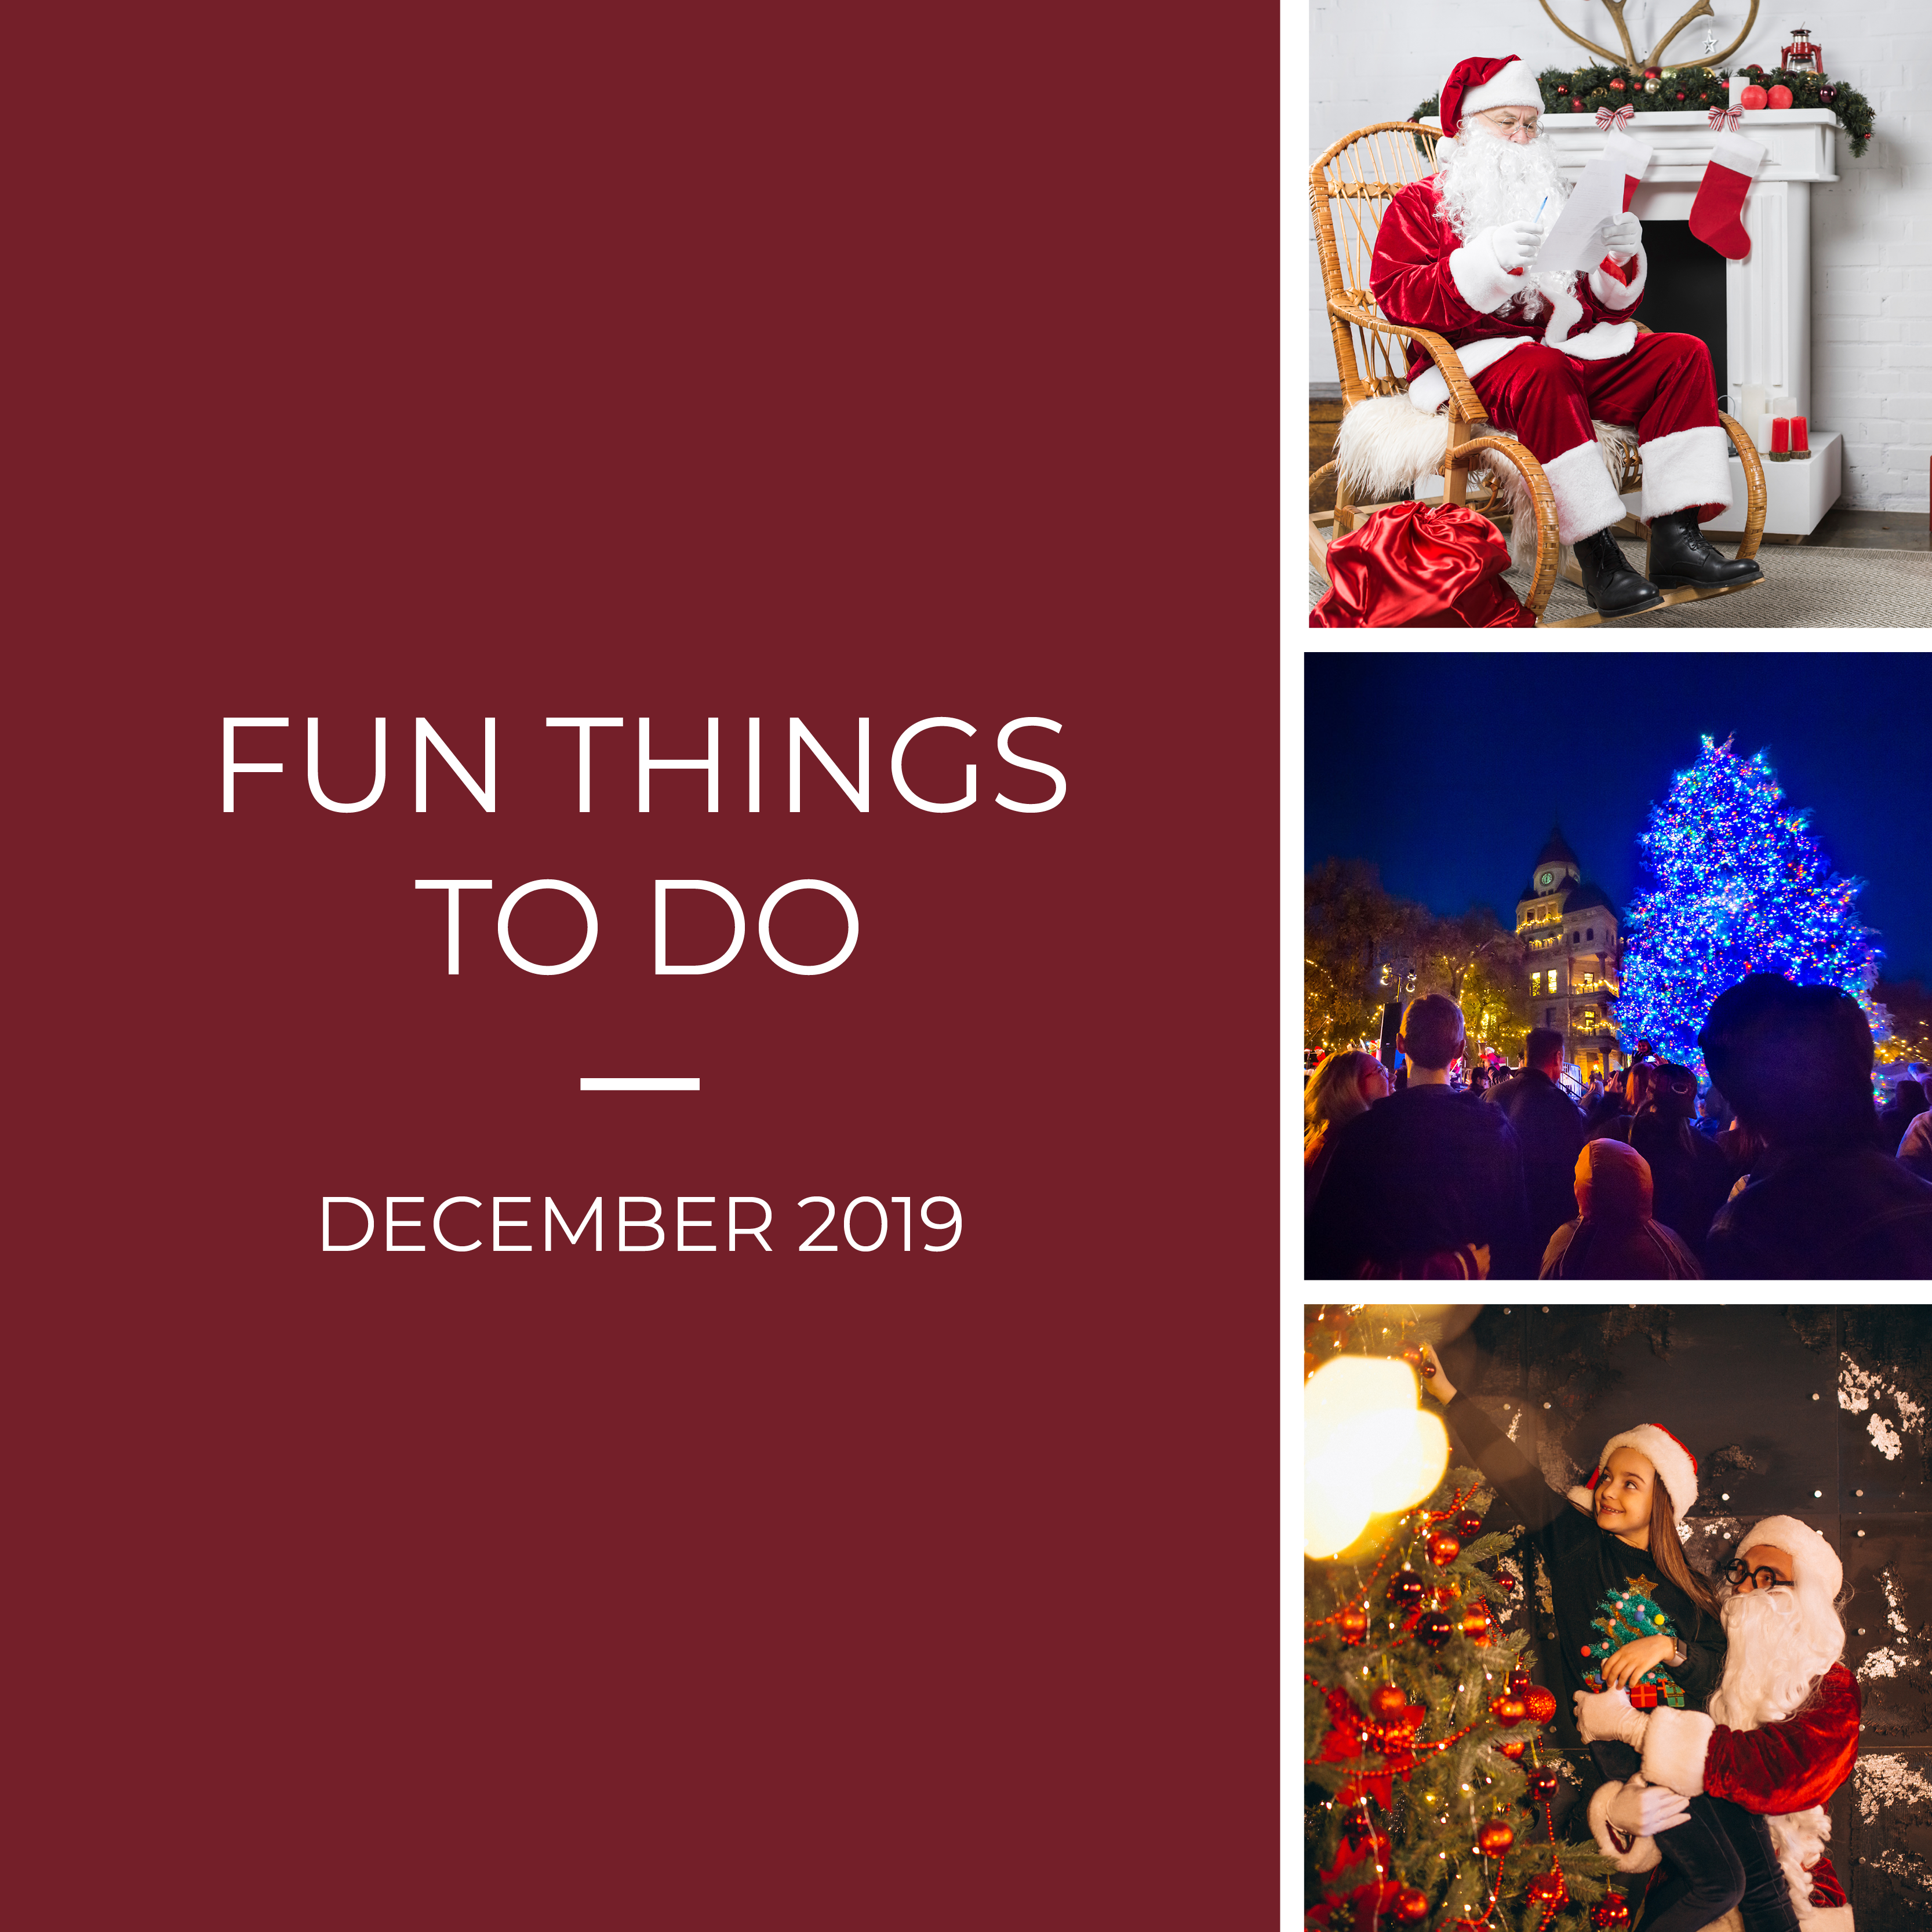 Fun Things to Do in December: Sleigh into the Holidays